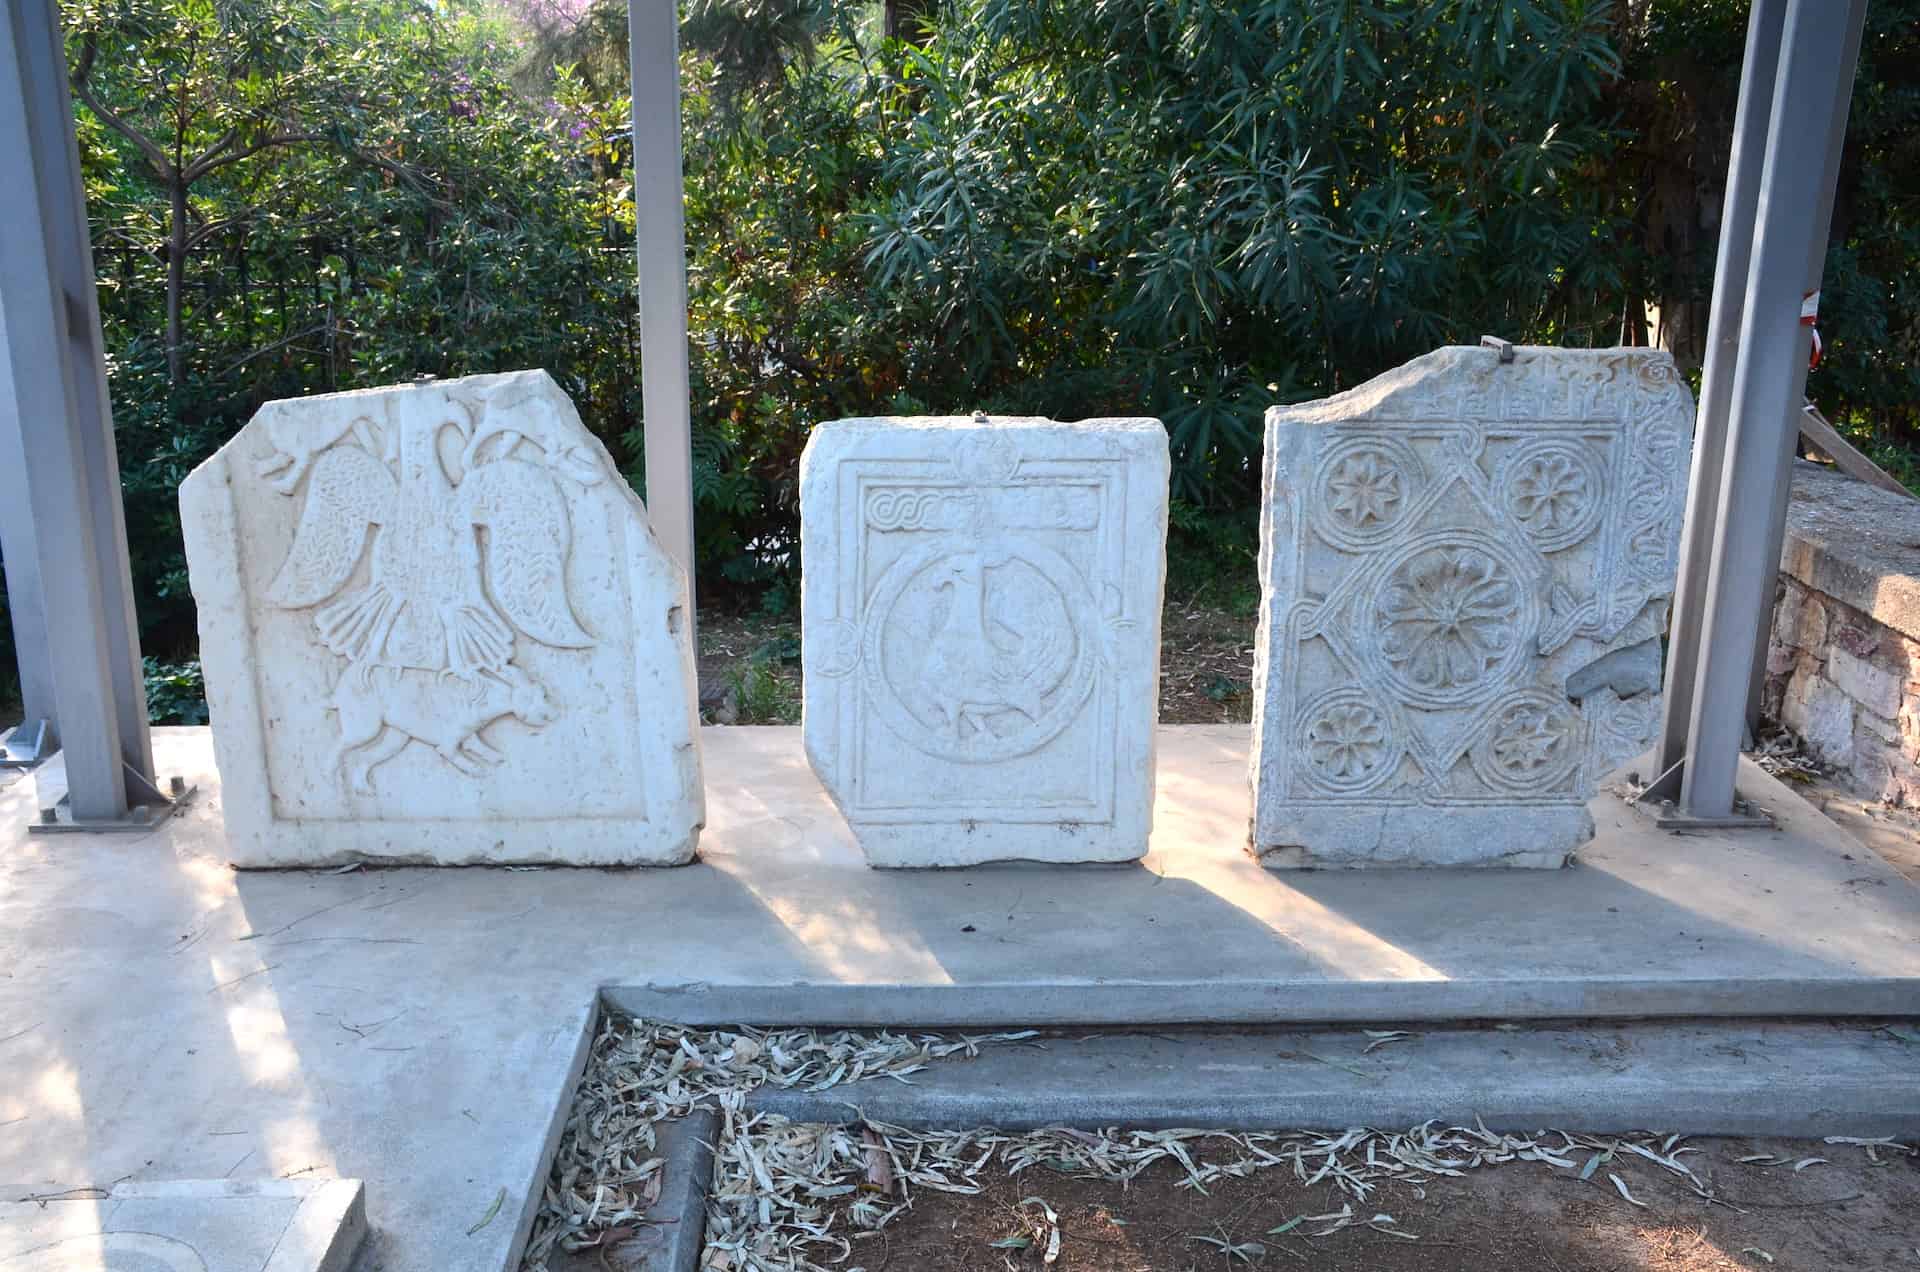 11th century closure slabs in the Byzantine Church in the Paradise exhibit in the gardens at Villa Ilissia (Byzantine Museum) in Athens, Greece